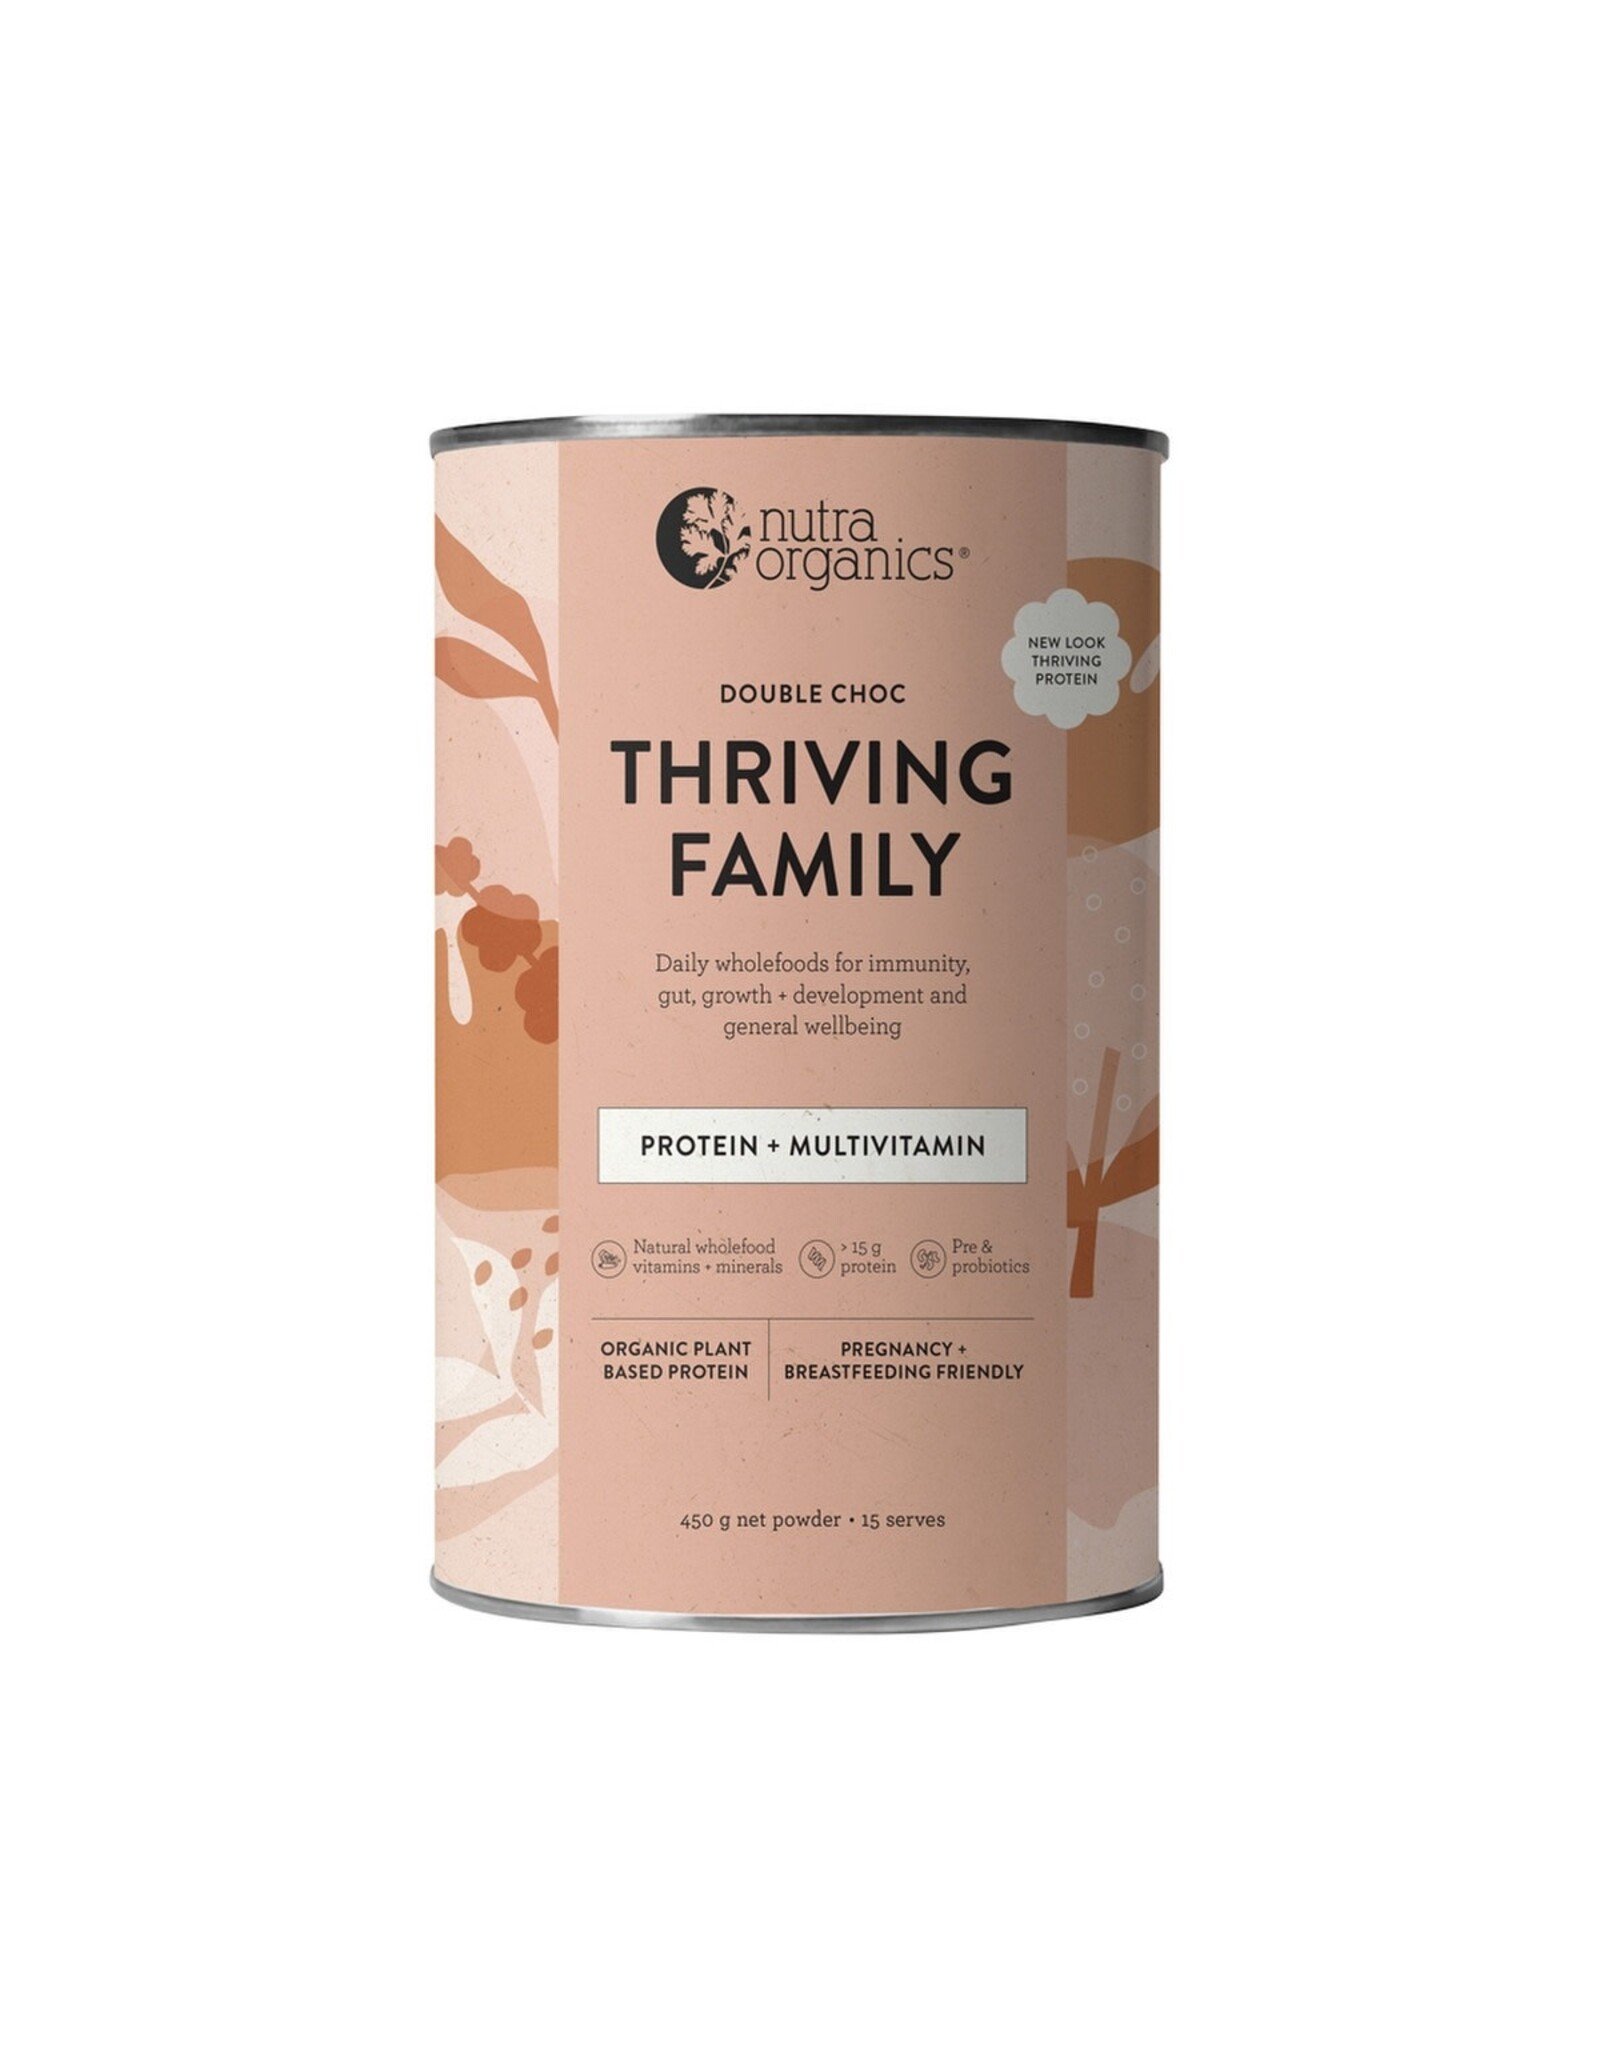 NutraOrganics Thriving Family Protein Double Choc 450g